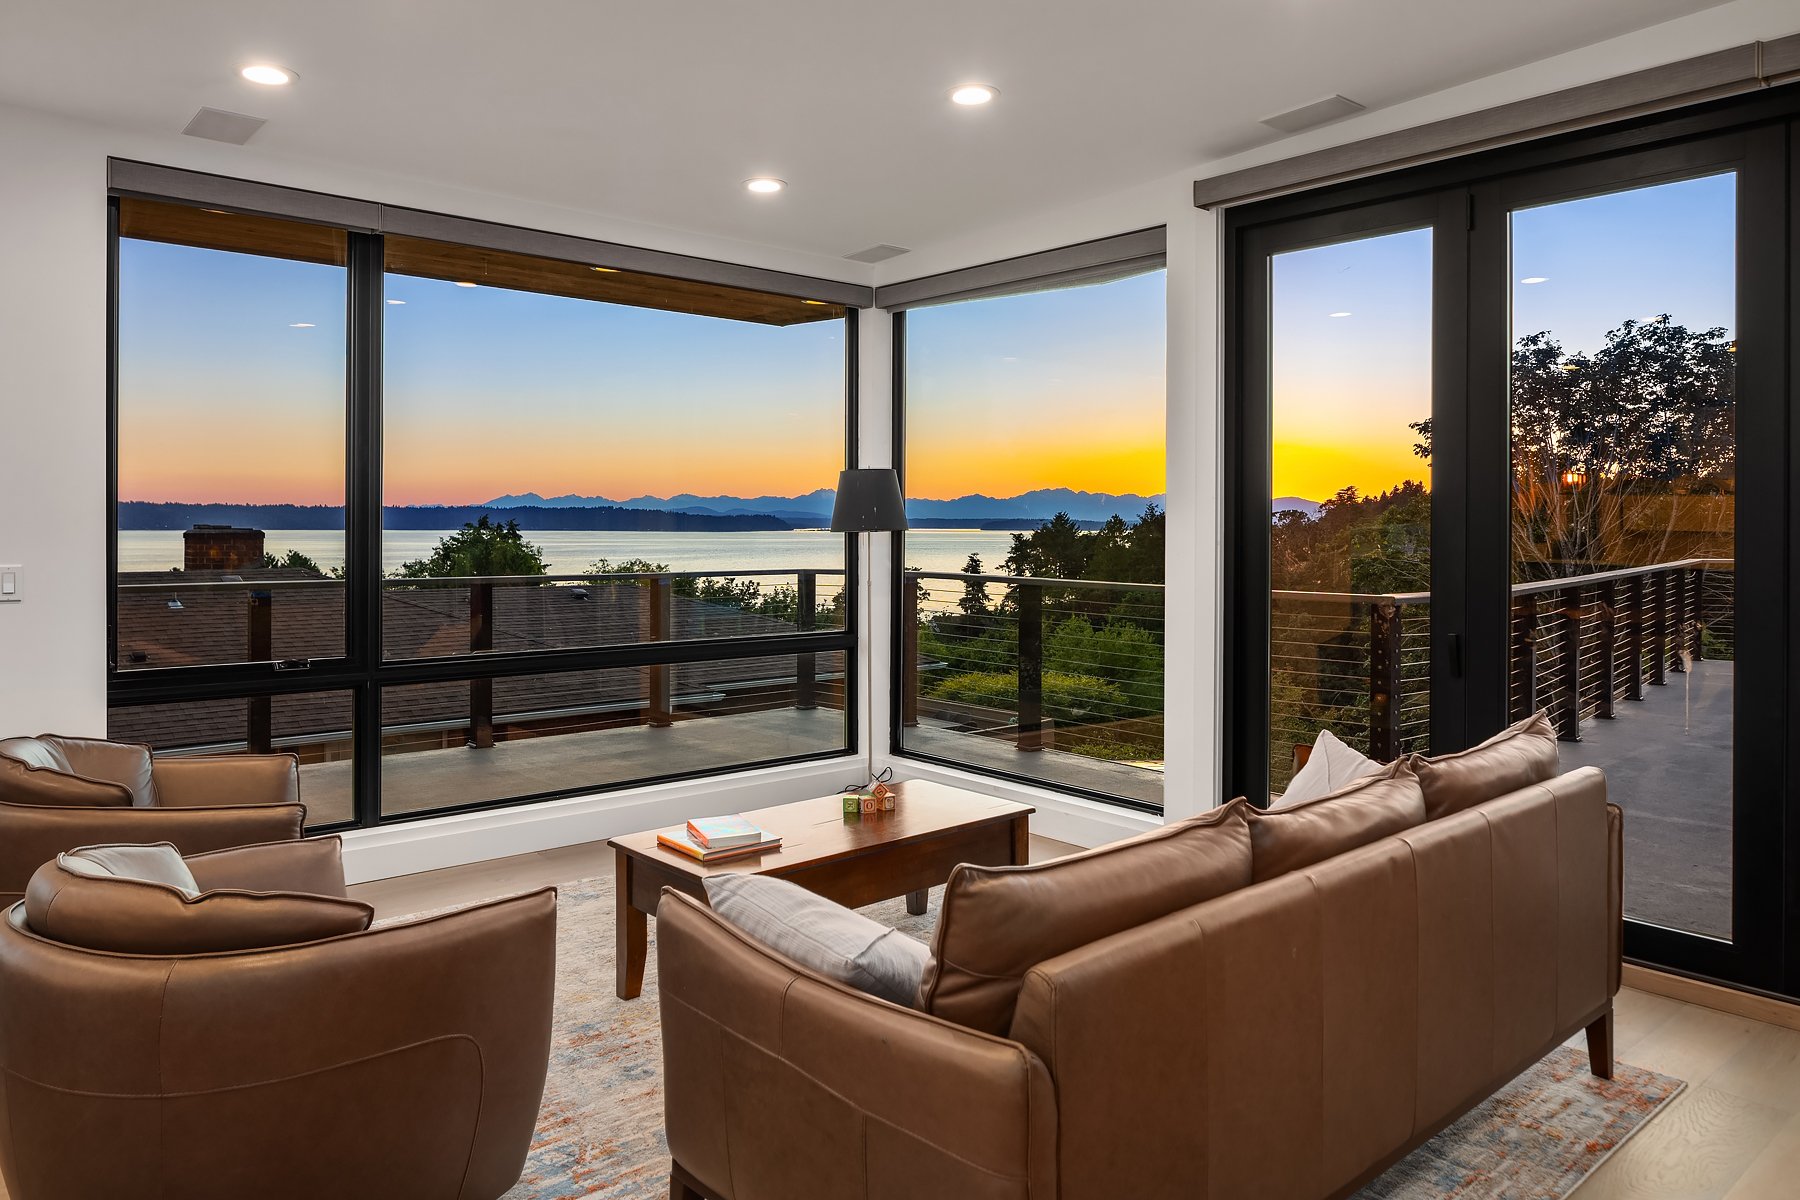 Harka Architecture_Puget Sound Residence_living room view.jpg